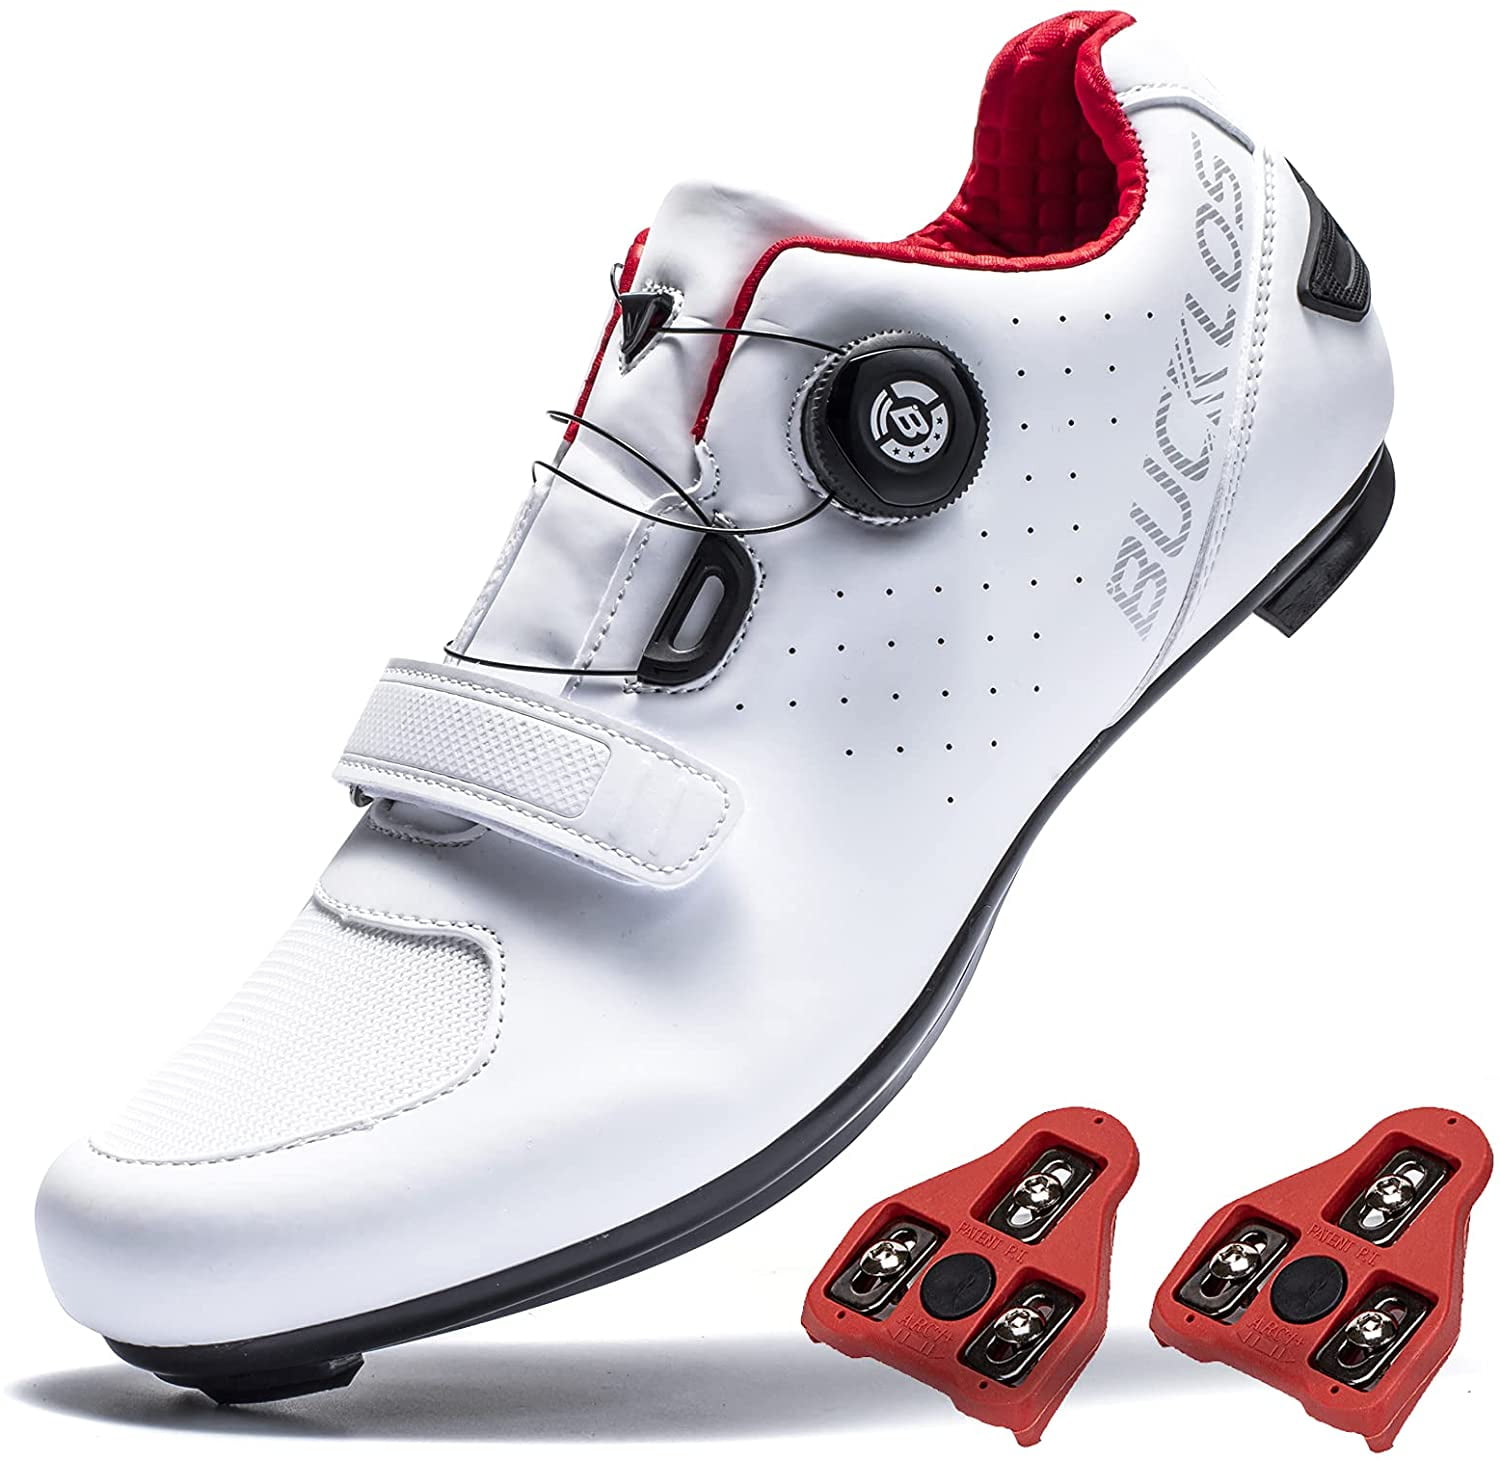 Details about   Mens Indoor Cycling Class Spin Cleat Delta Shoes SPD/SPD-SL Bike Riding Sneakers 